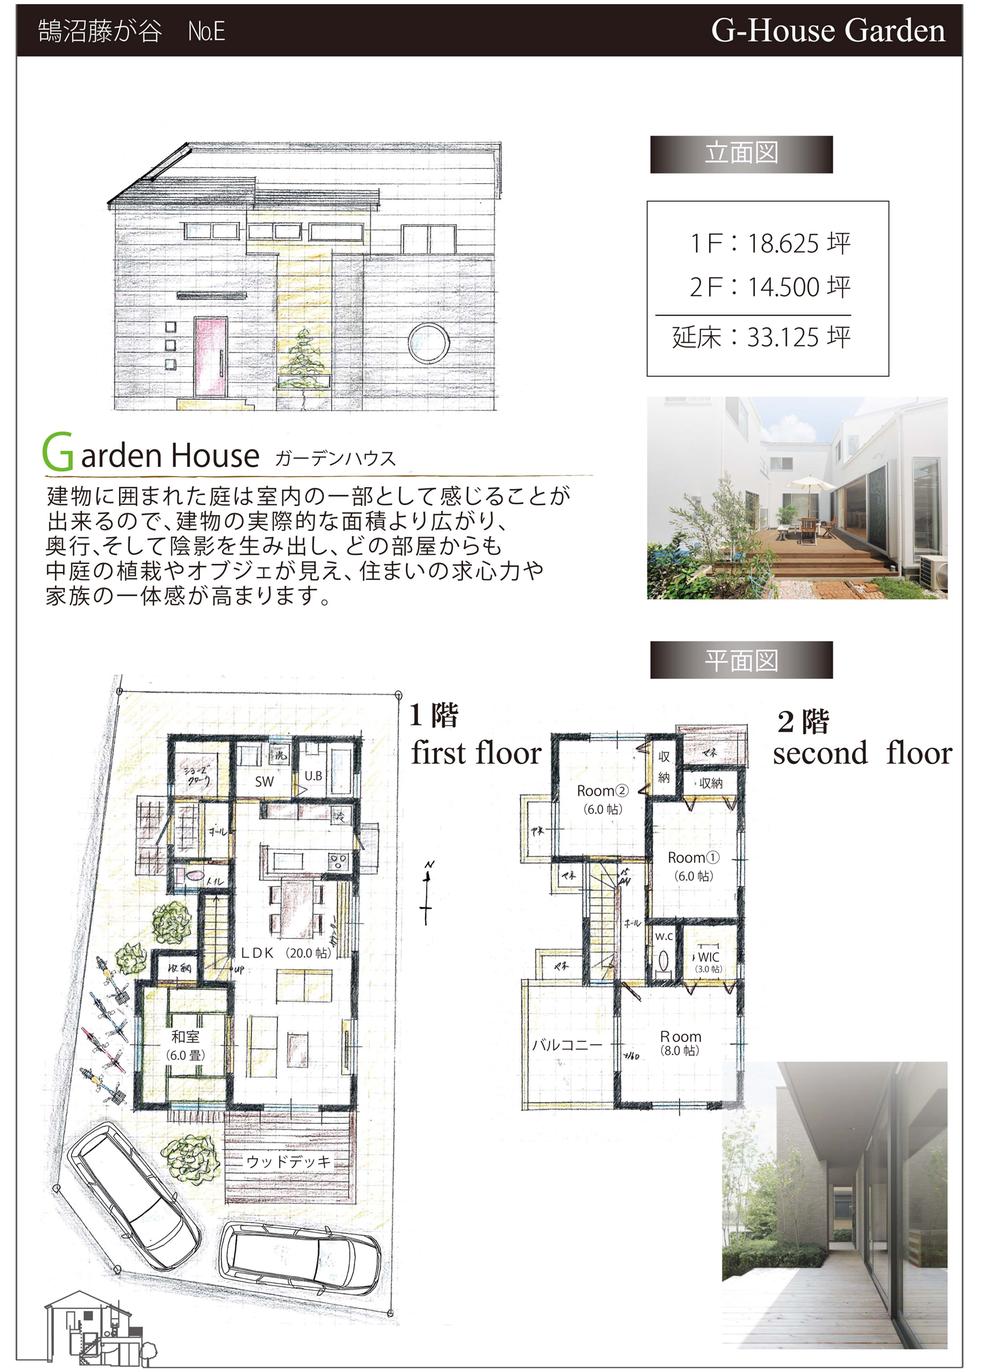 Other building plan example. E compartment building reference plan ~ Garden House ~